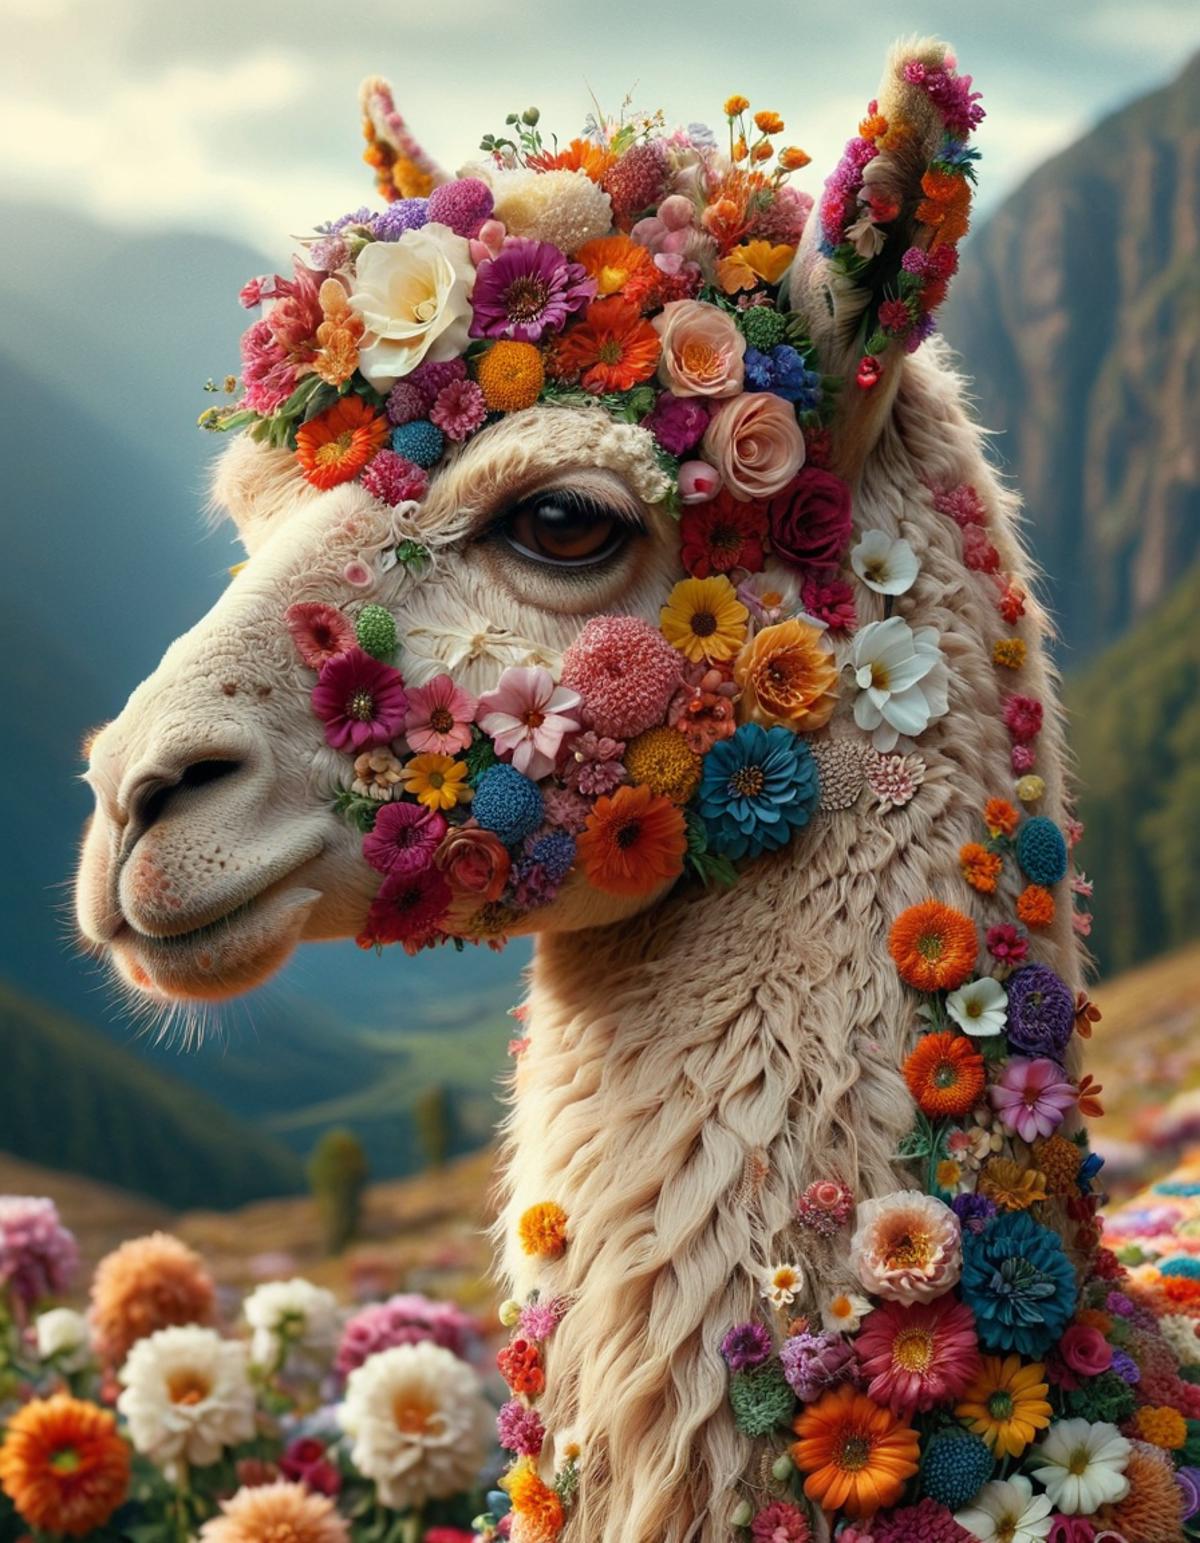 An Adorable Llama with a Floral Headband and Flower Crown